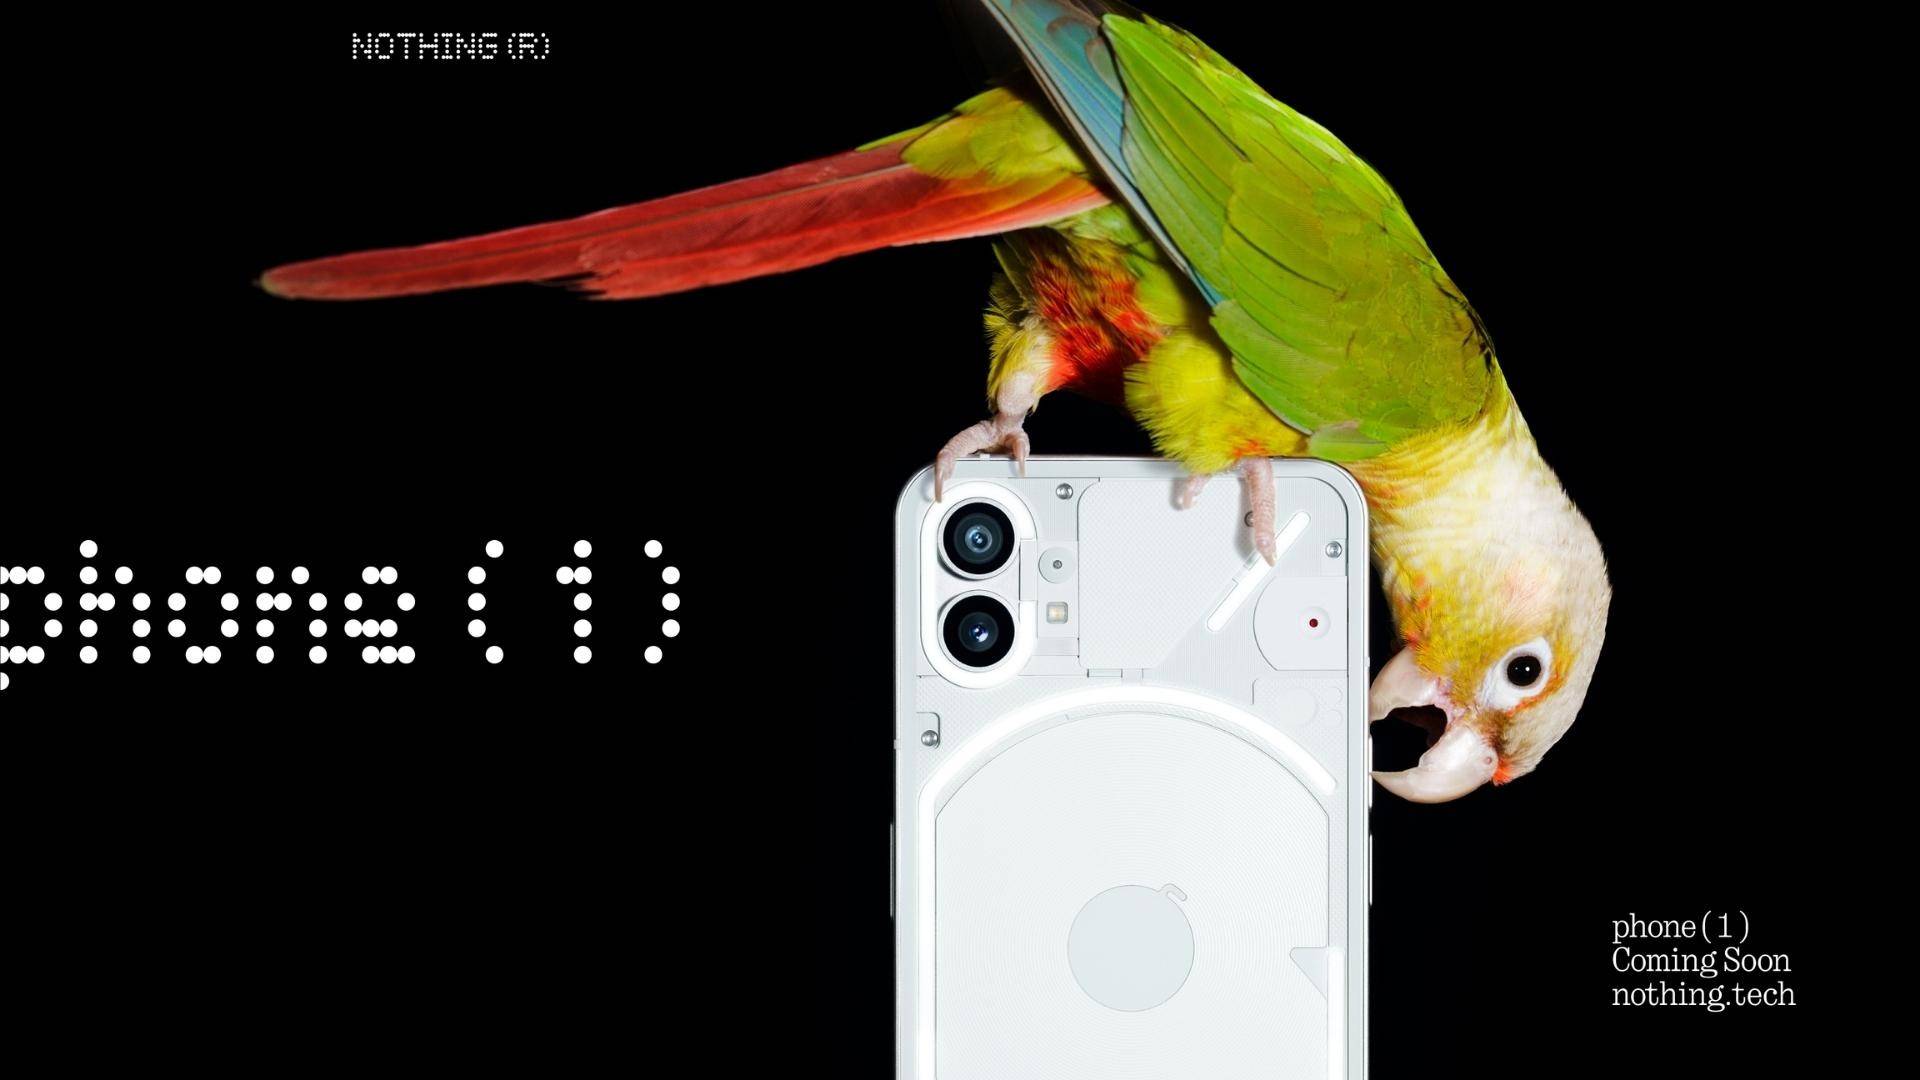 An image showcasing the back panel of nothing phone 1 with a bird sitting on top of it